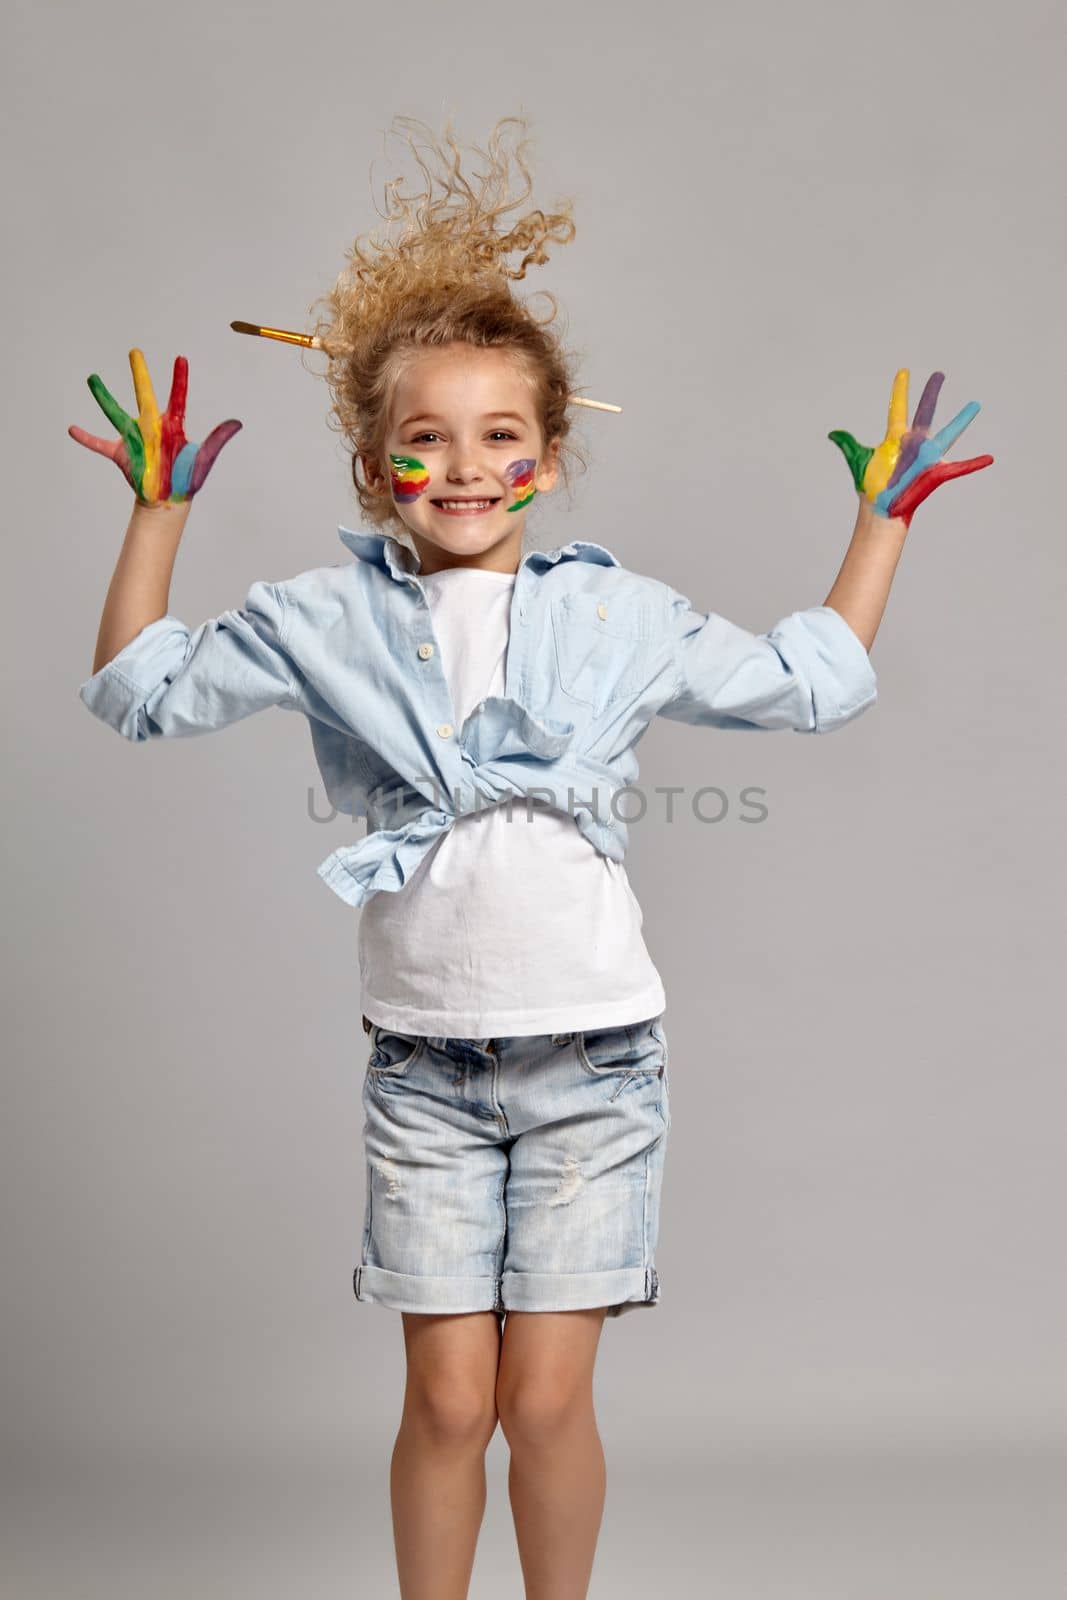 Cheerful girl having a brush in her chic curly blond hair, wearing in a blue shirt and white t-shirt. She raised her painted arms up and smiling, on a gray background.